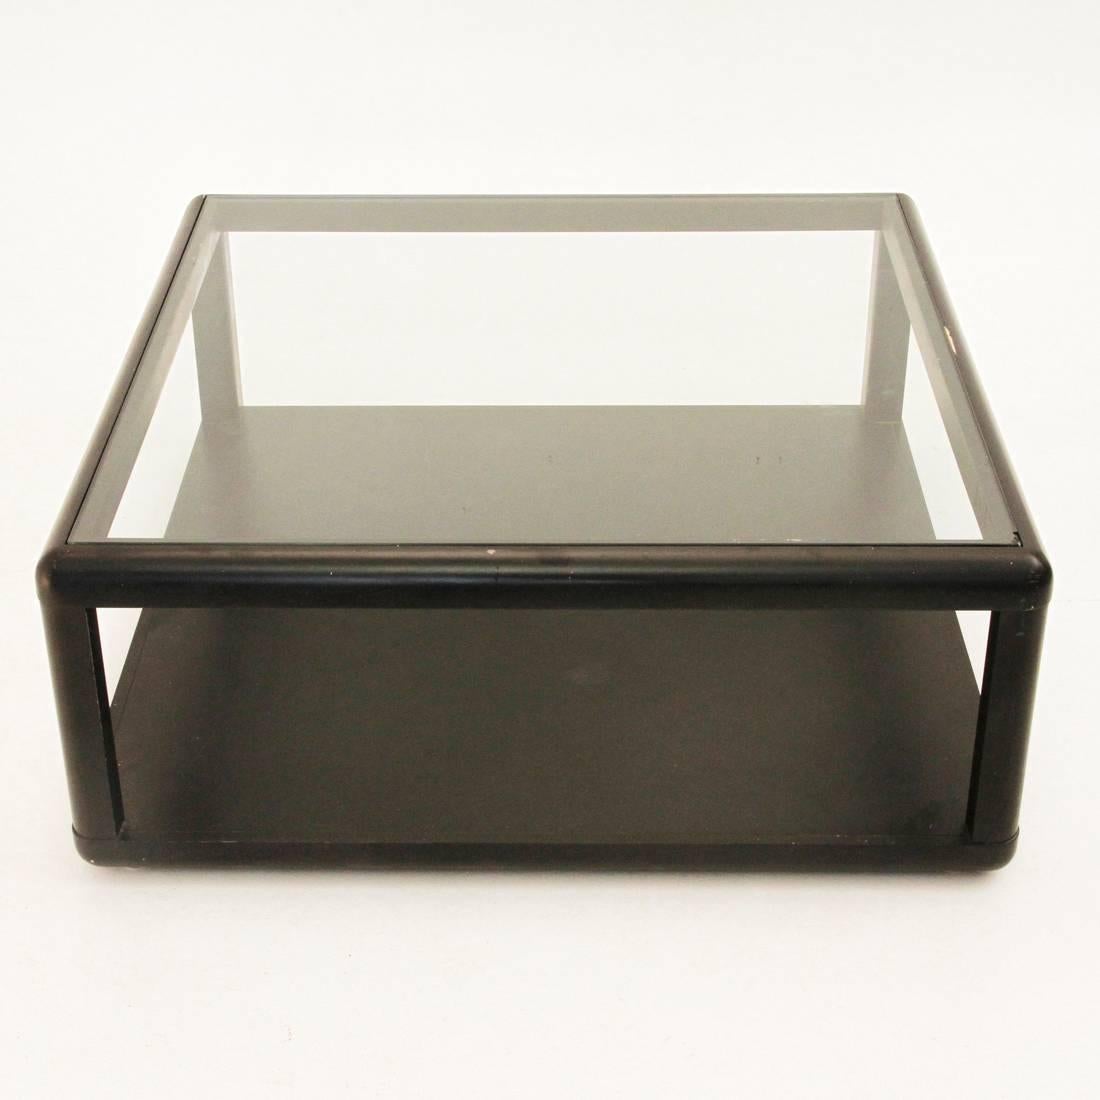 Produced in 1975 and designed by the Tecno Projects Center.
Structure in black lacquered wood, top in glass.